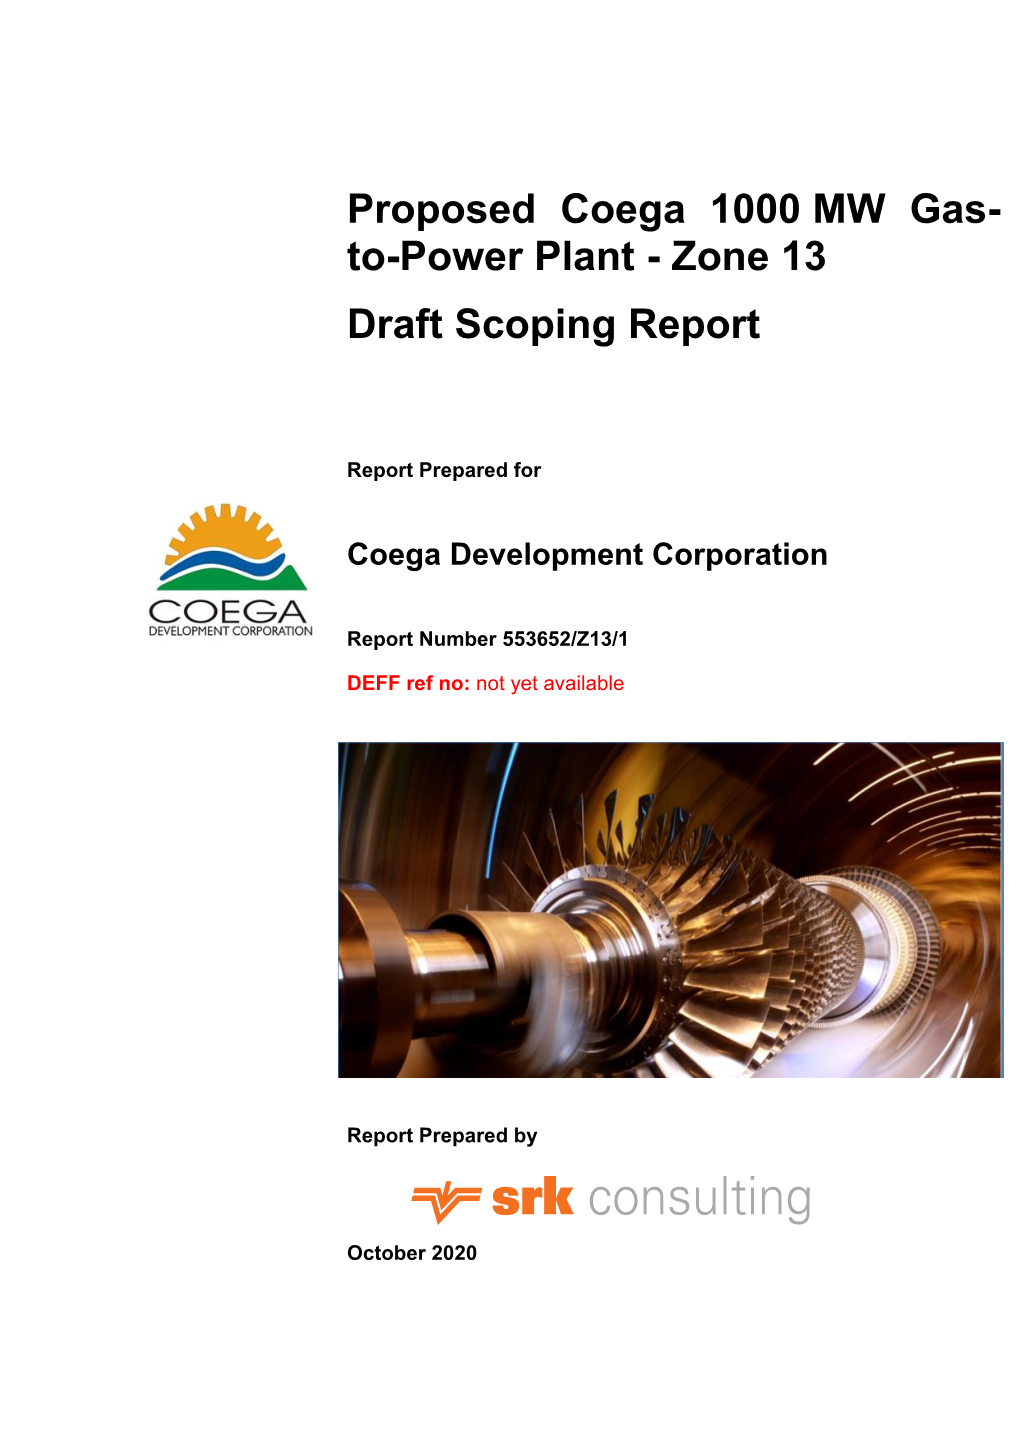 Proposed Coega 1000 MW Gas- To-Power Plant - Zone 13 Draft Scoping Report